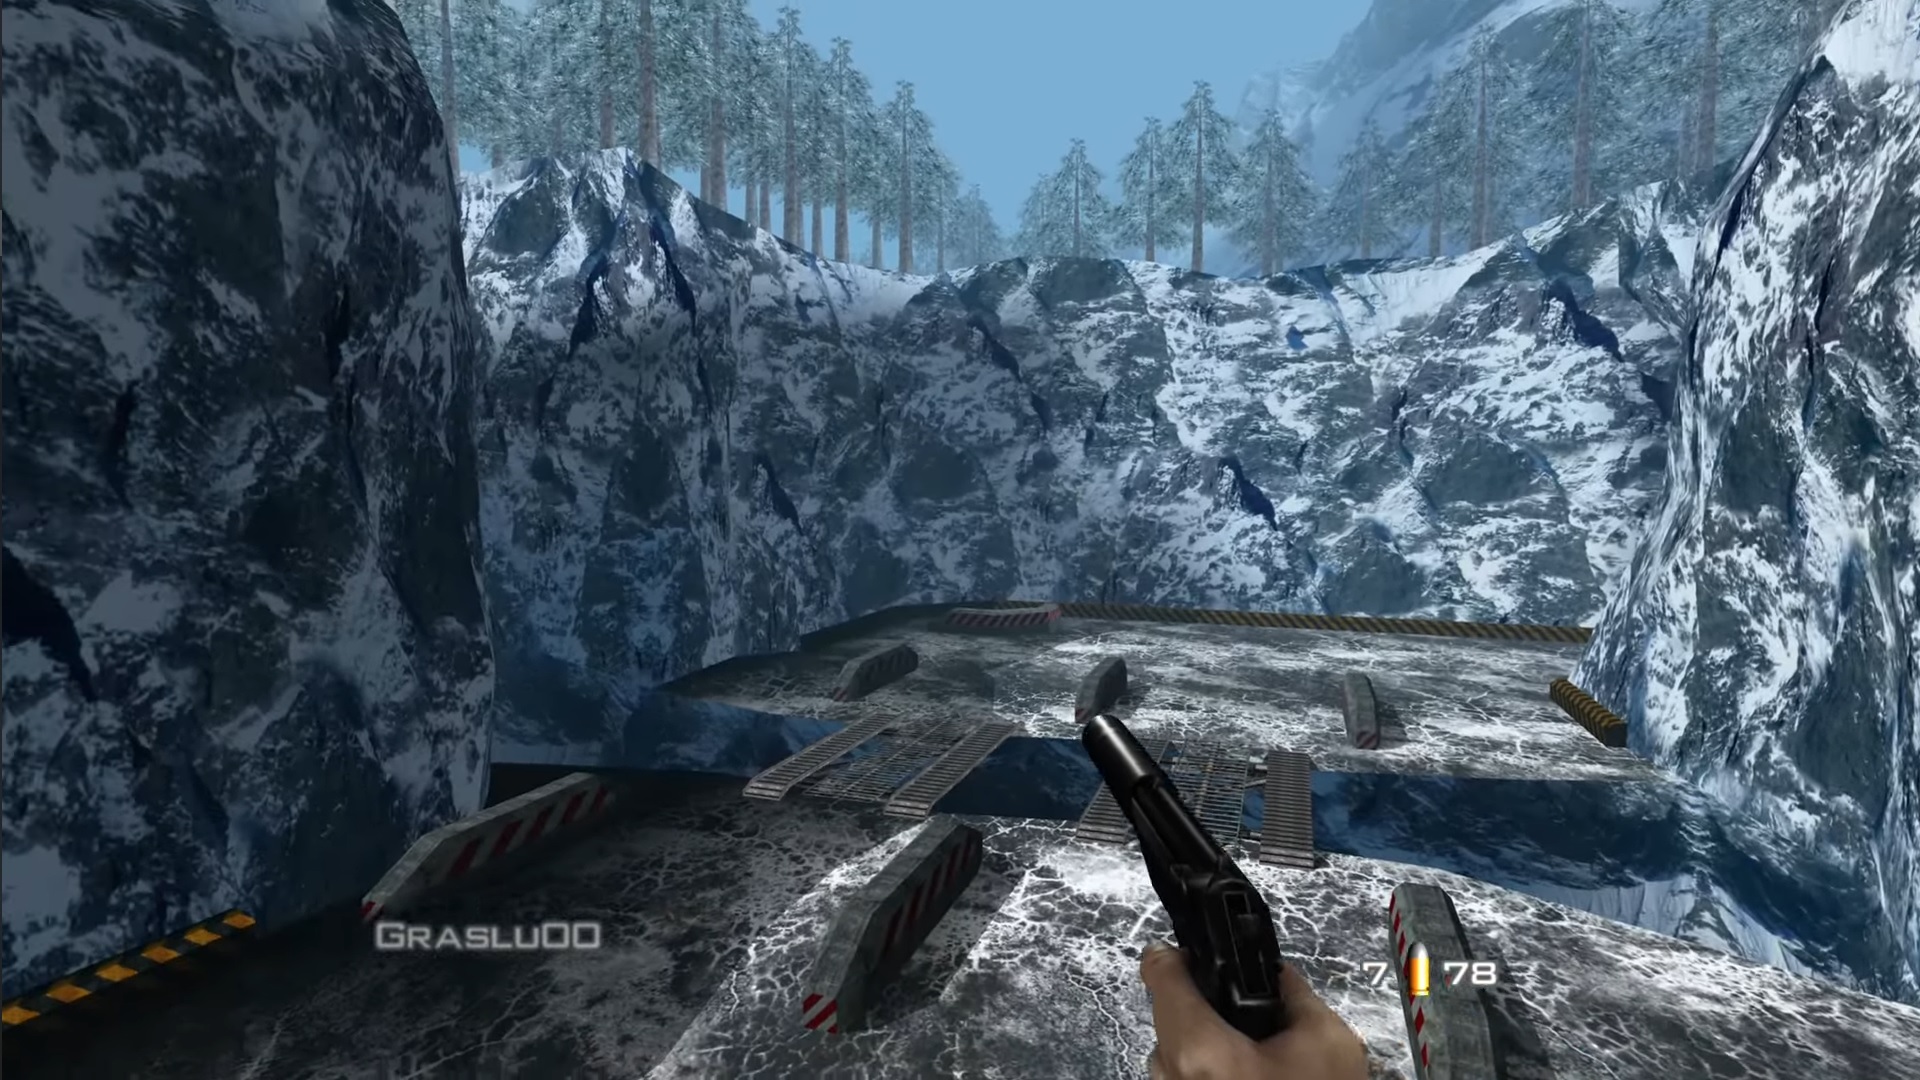 GoldenEye 007 remaster for Xbox 360: Where to download and how to